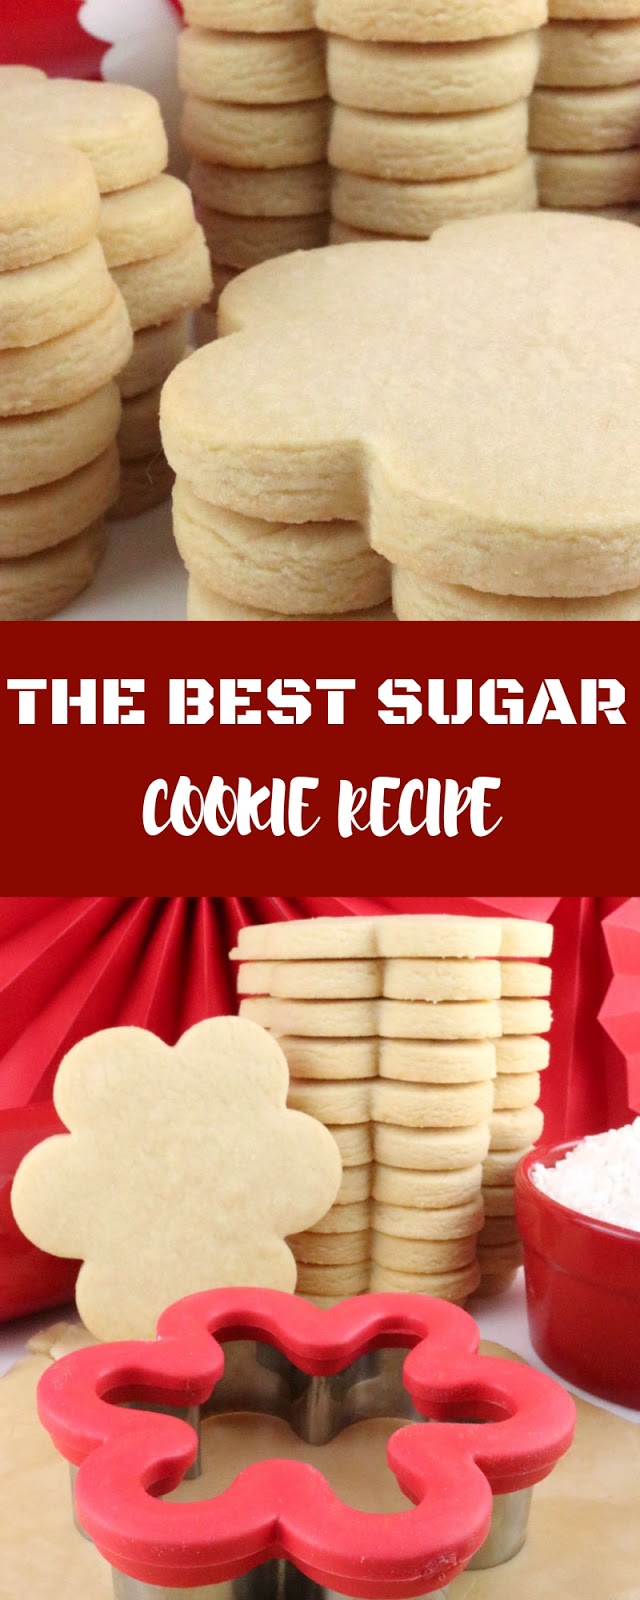 THE BEST SUGAR COOKIE RECIPES